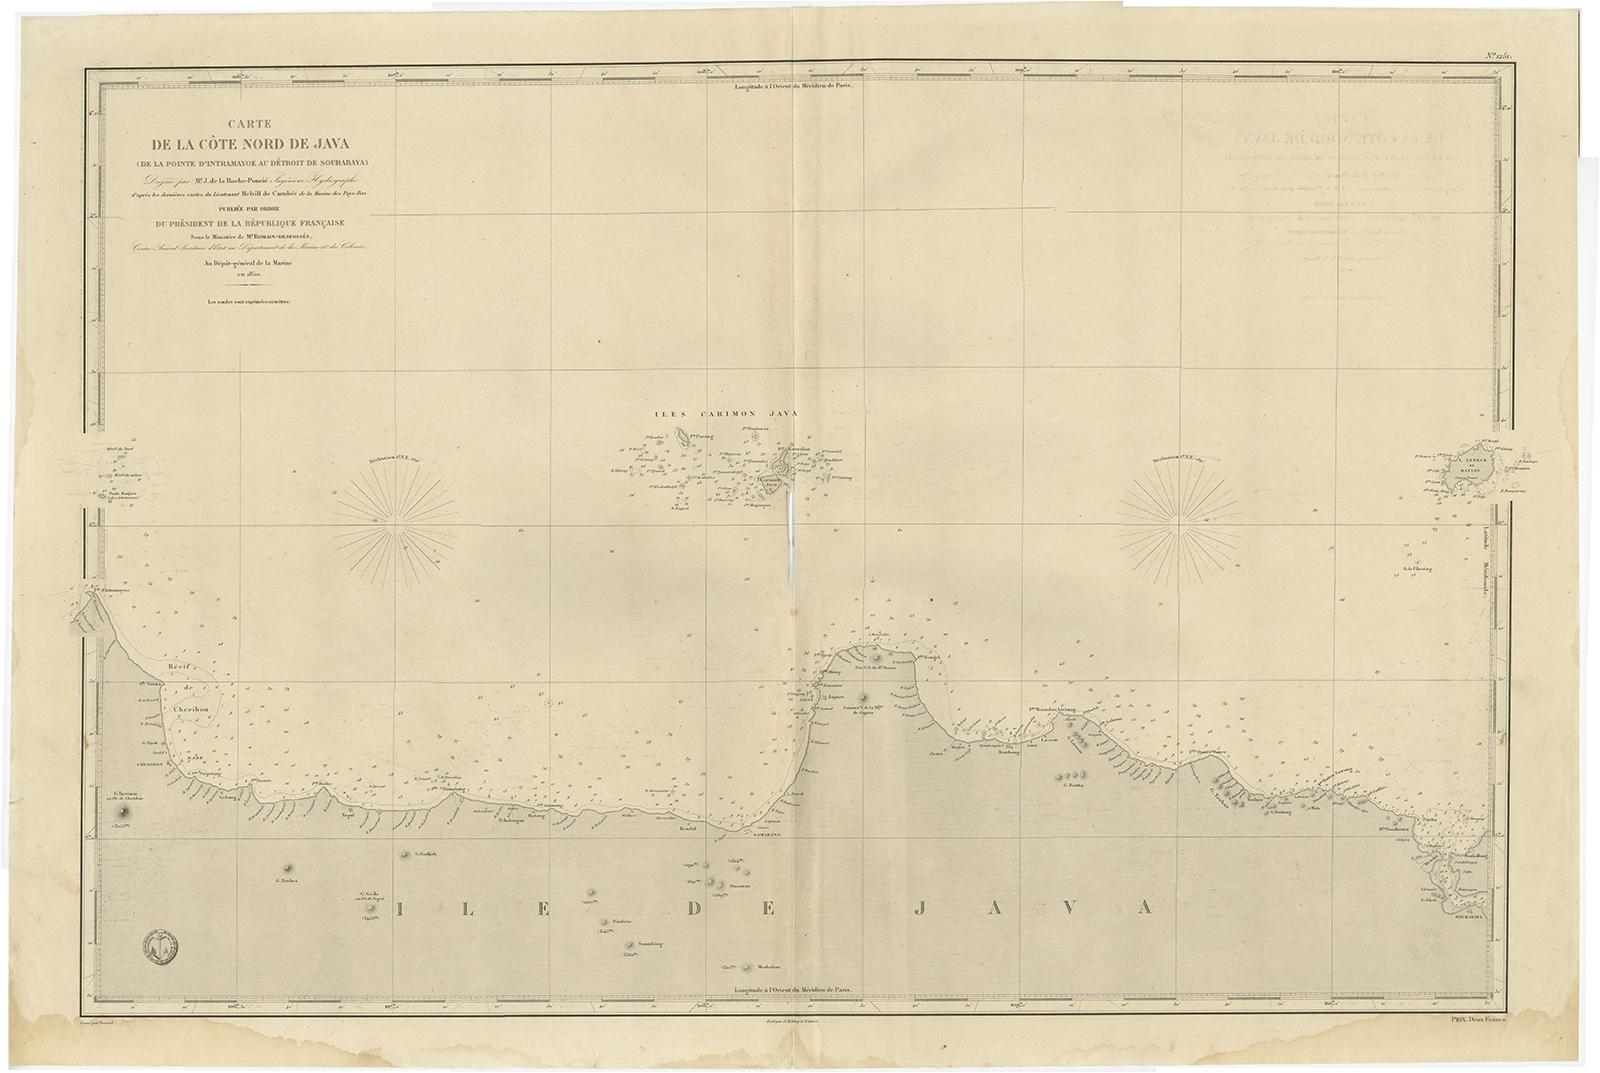 Antique map titled Carte de la côte Nord de Java.

Early French nautical chart of the northern coast of the island of Java, Indonesia. It includes Cirebon, Semarang, Jepara and many other cities and villages. Published by Dépôt des Cartes et Plans